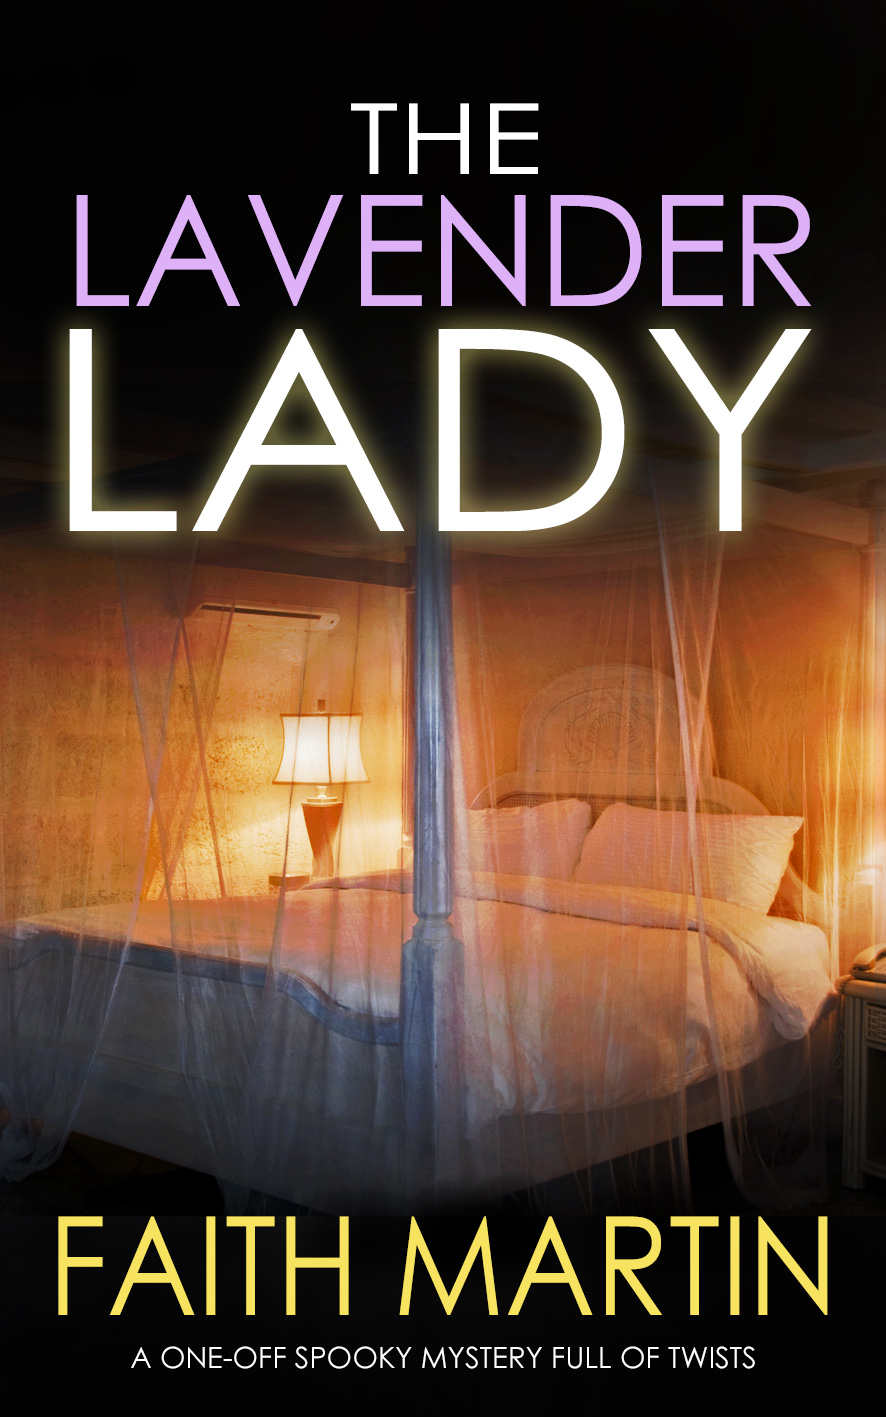 The Lavender Lady